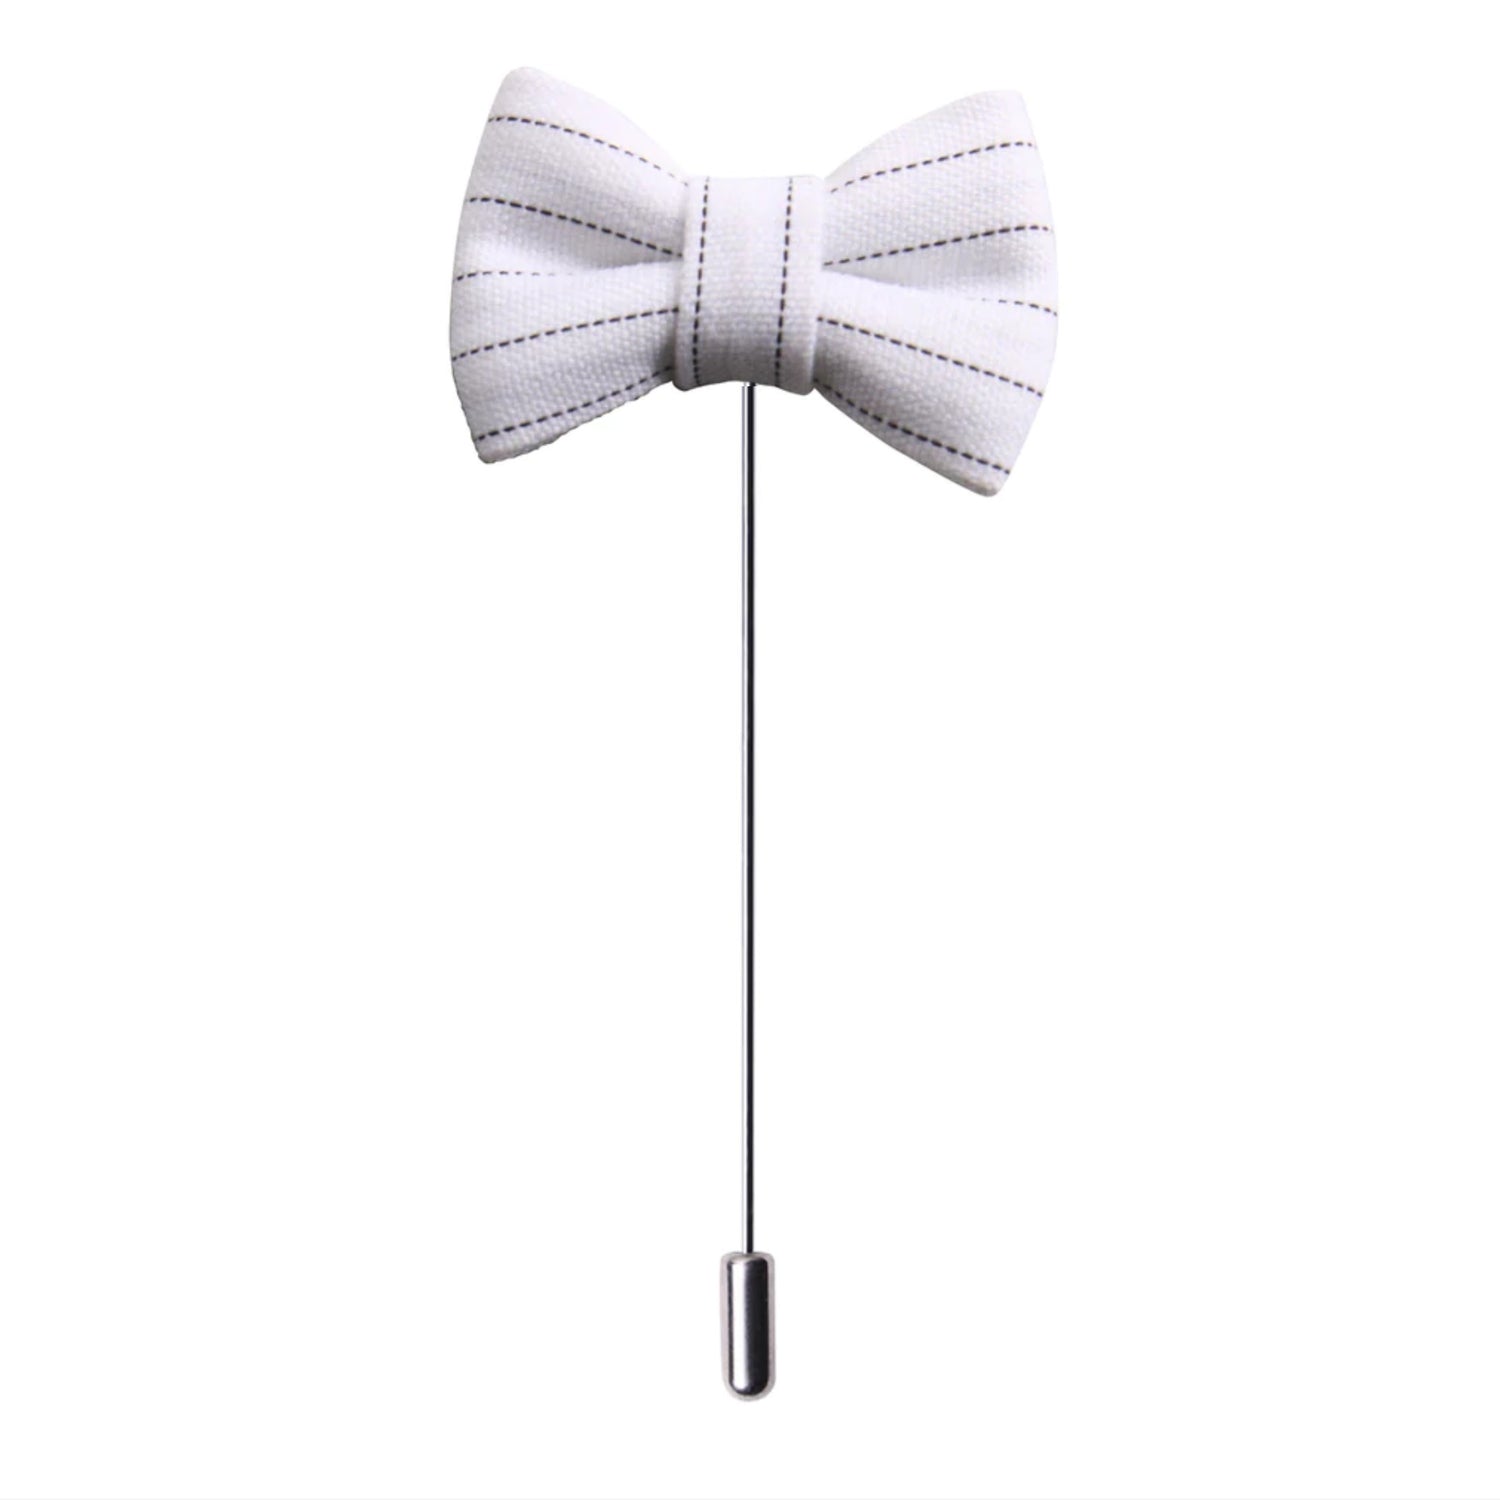 A White, Black Pinstripe Colored Bow Tie Shaped Lapel Pin||White with Black Pinstripe